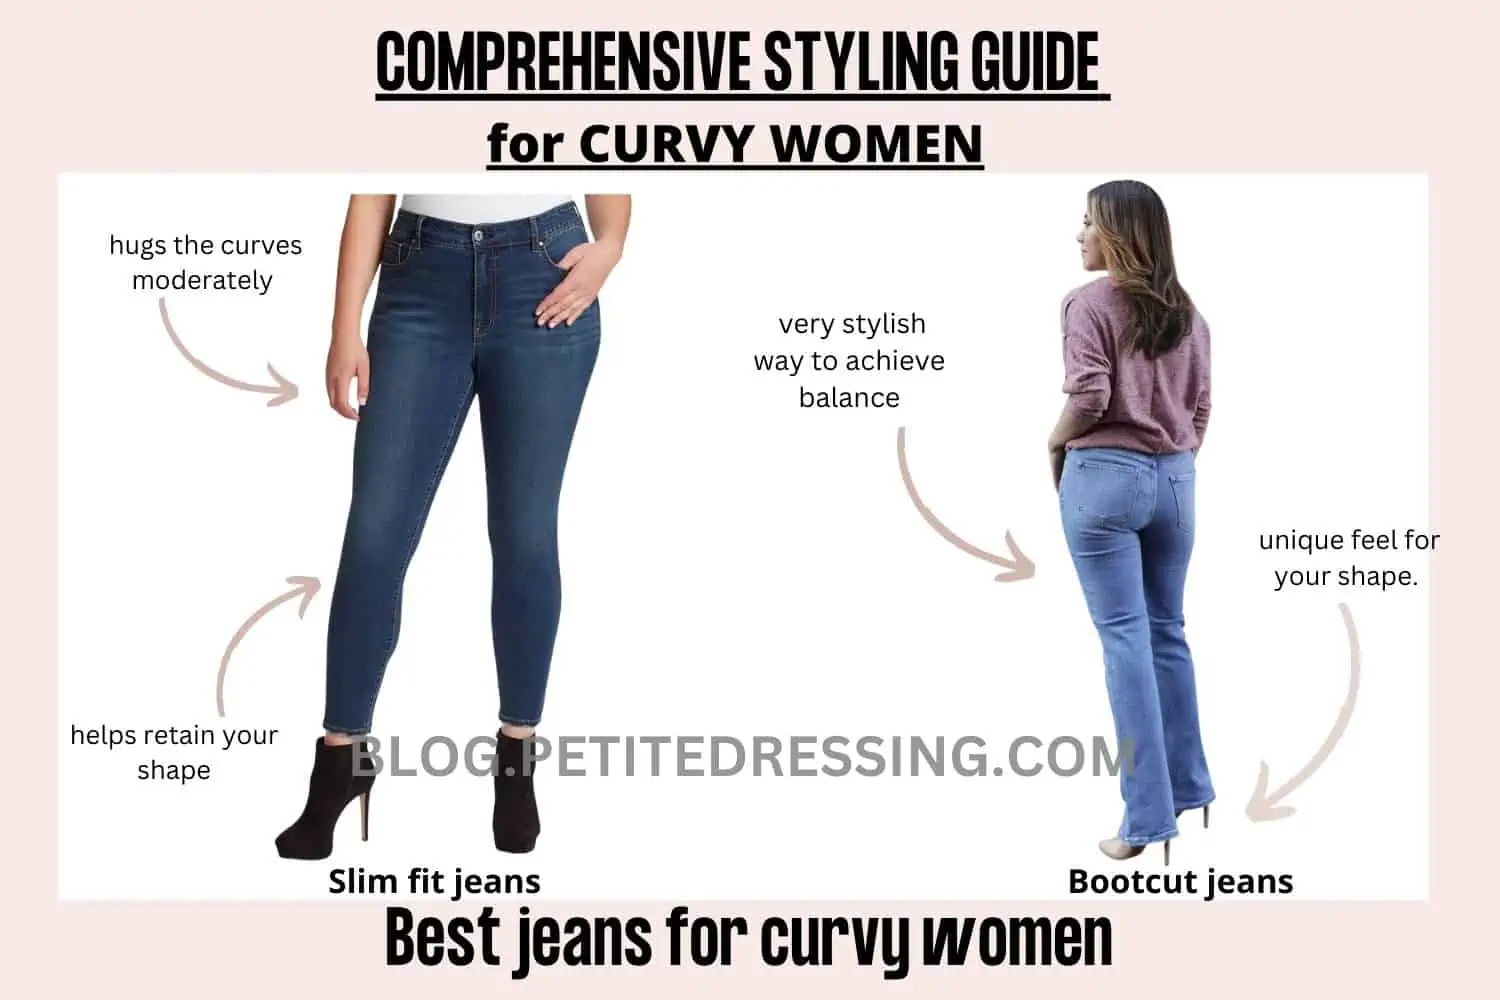 7 Lifesaving Styling Hacks for Curvy Girls Wanting an on Point